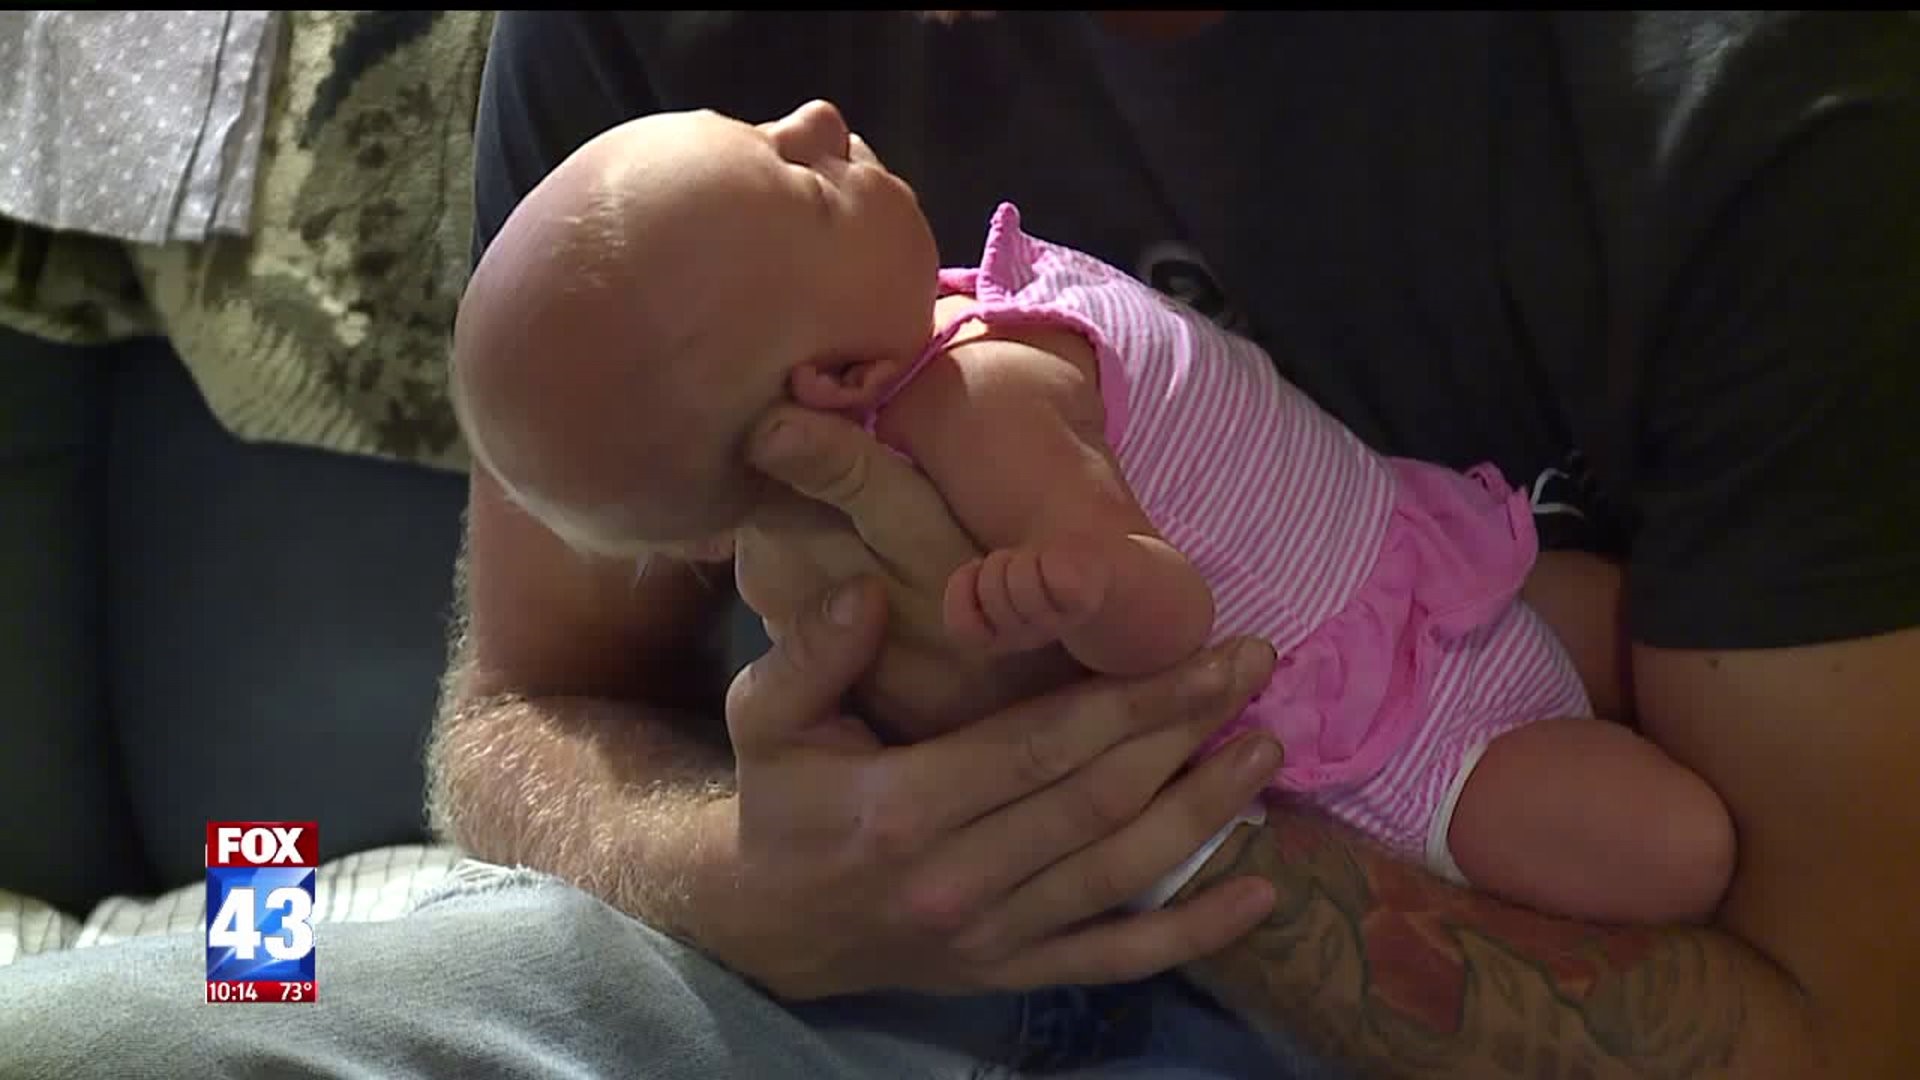 York County firefighter helps deliver his own daughter into the world